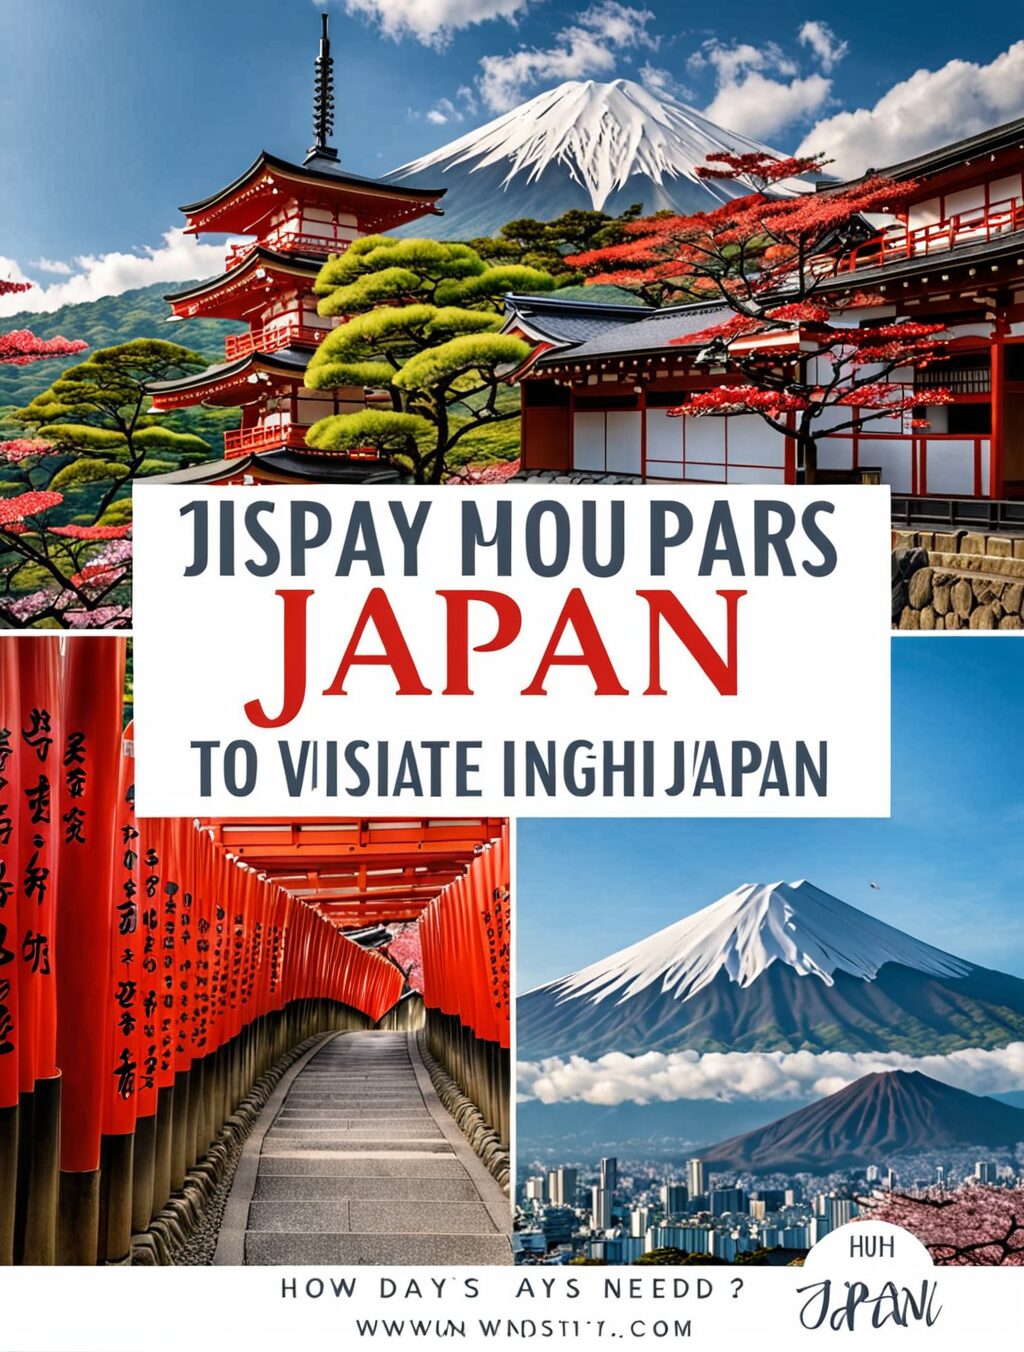 how many days needed to visit japan